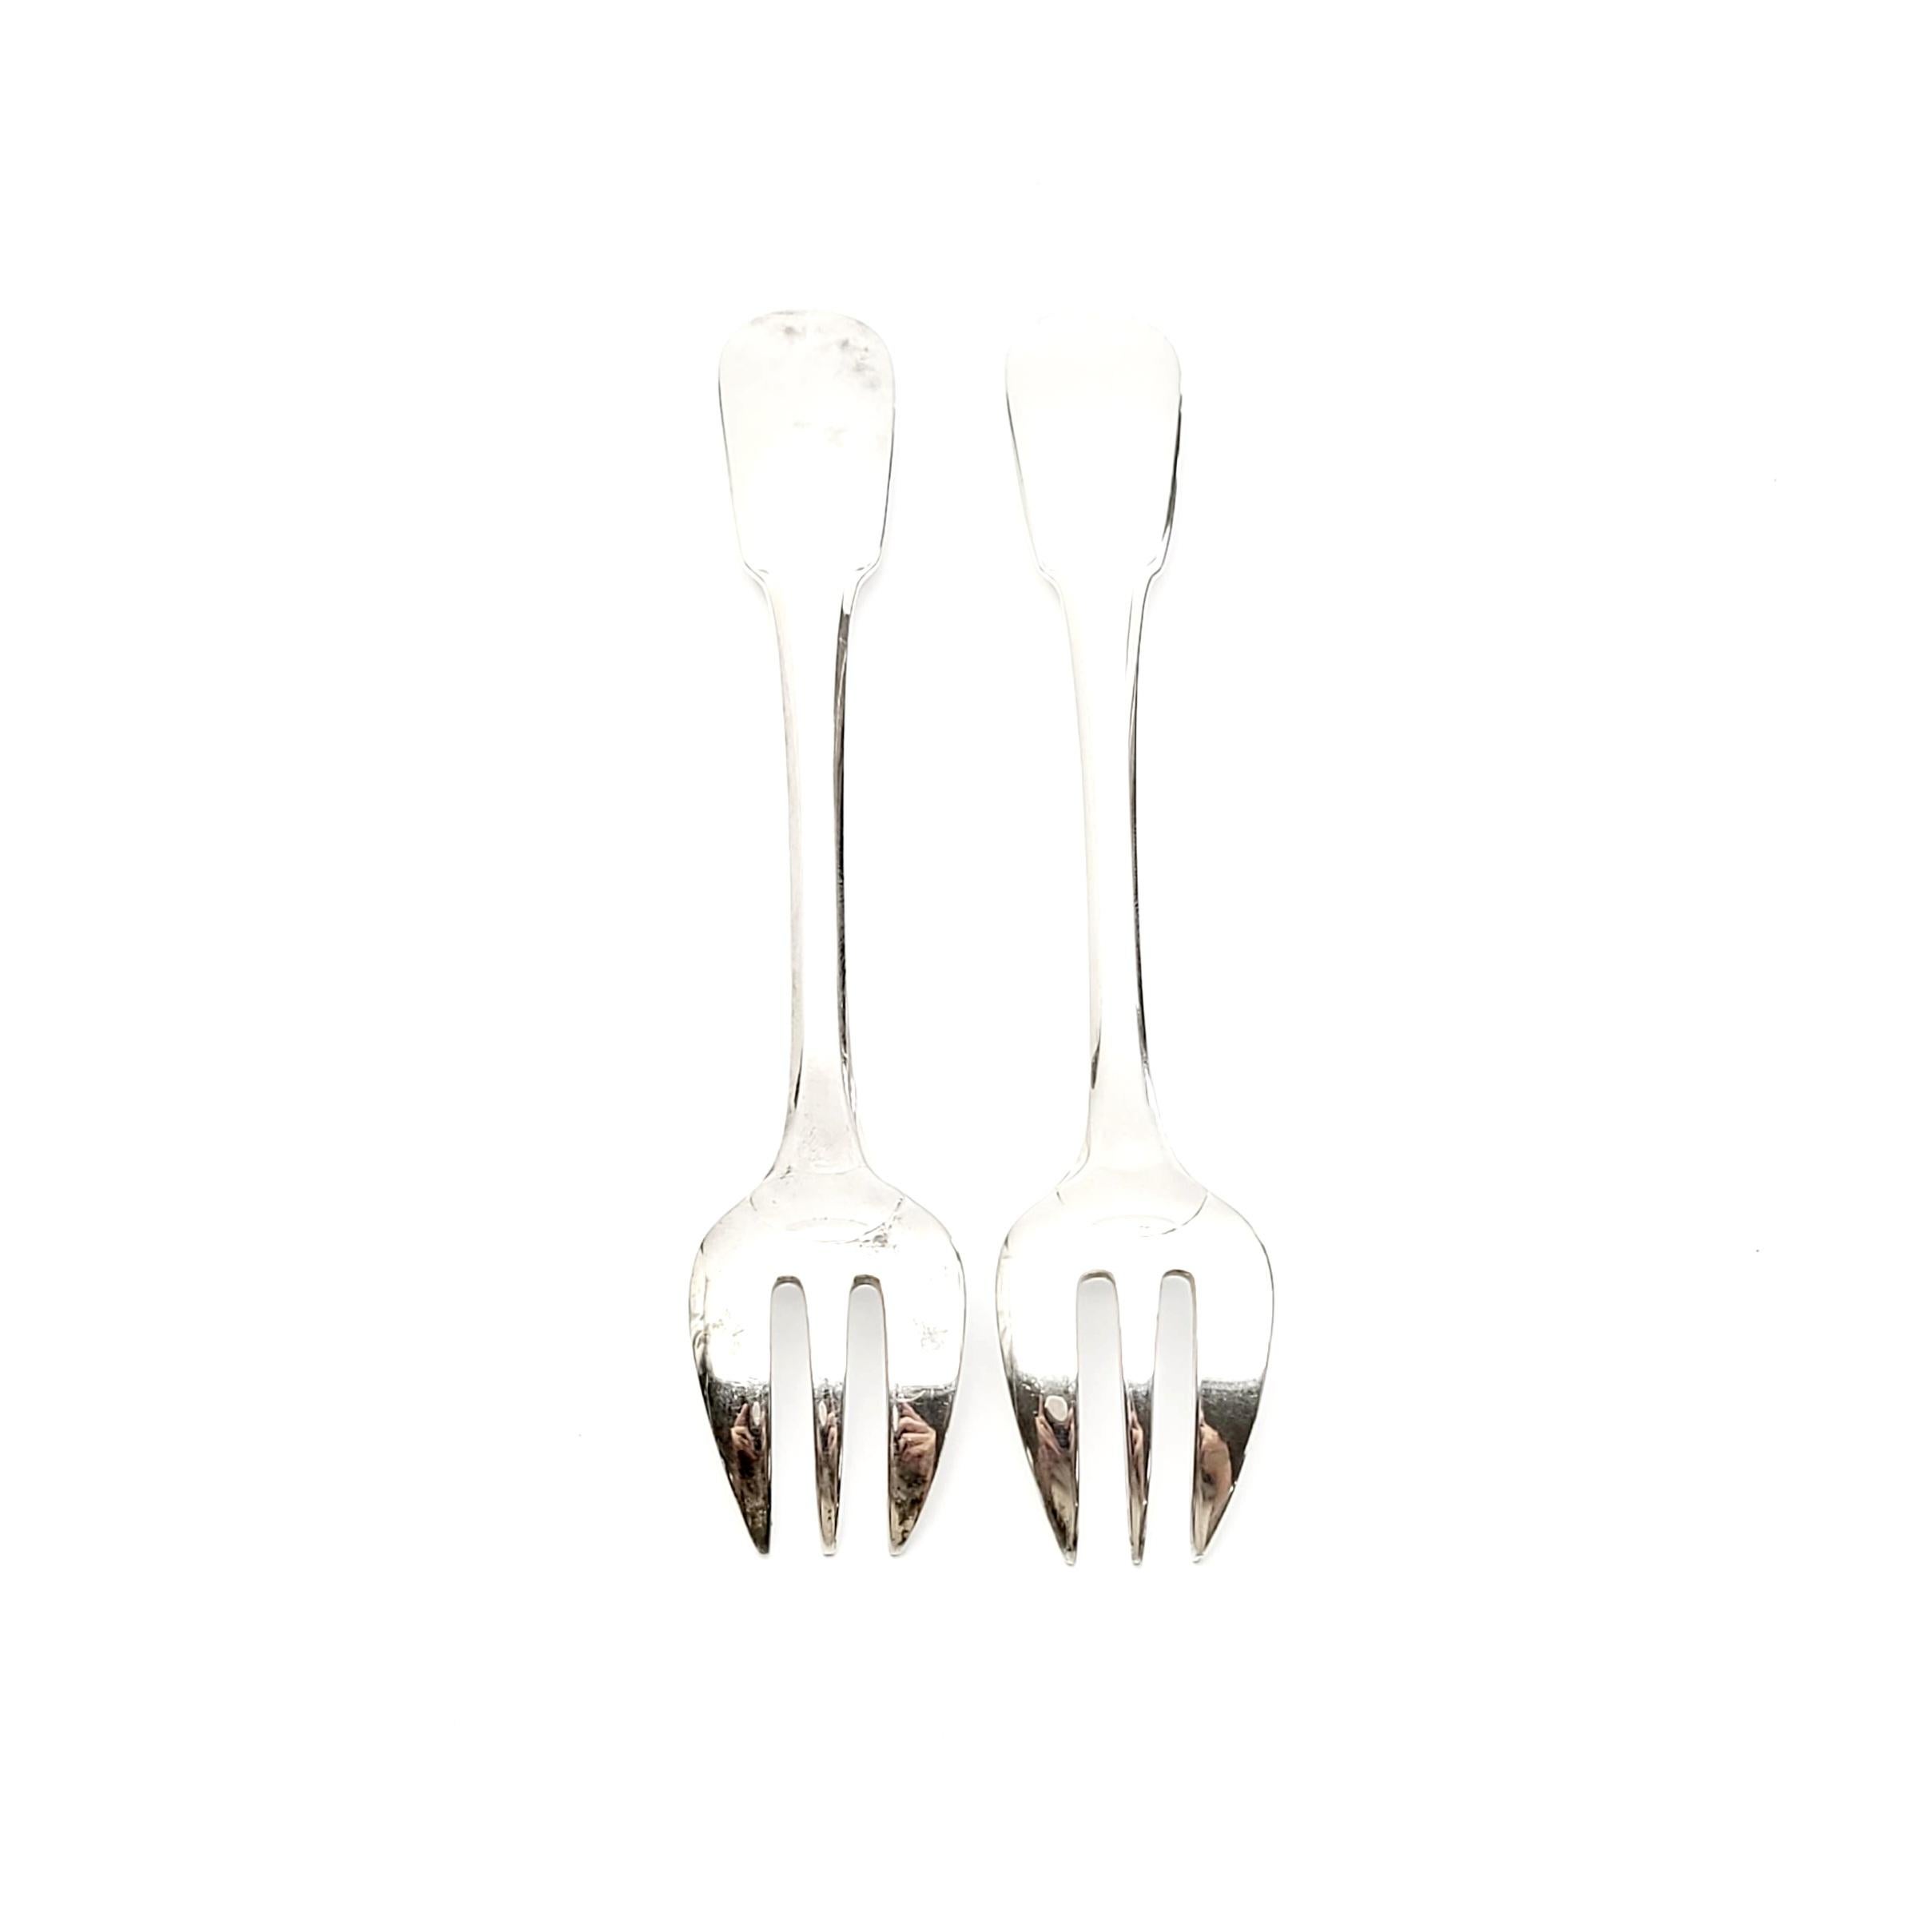 Set of 2 vintage silver plate oyster forks in the Cluny pattern by Christofle.

The Cluny pattern is a simple and elegant design named for the medieval abbey.

Measures: 5 3/4